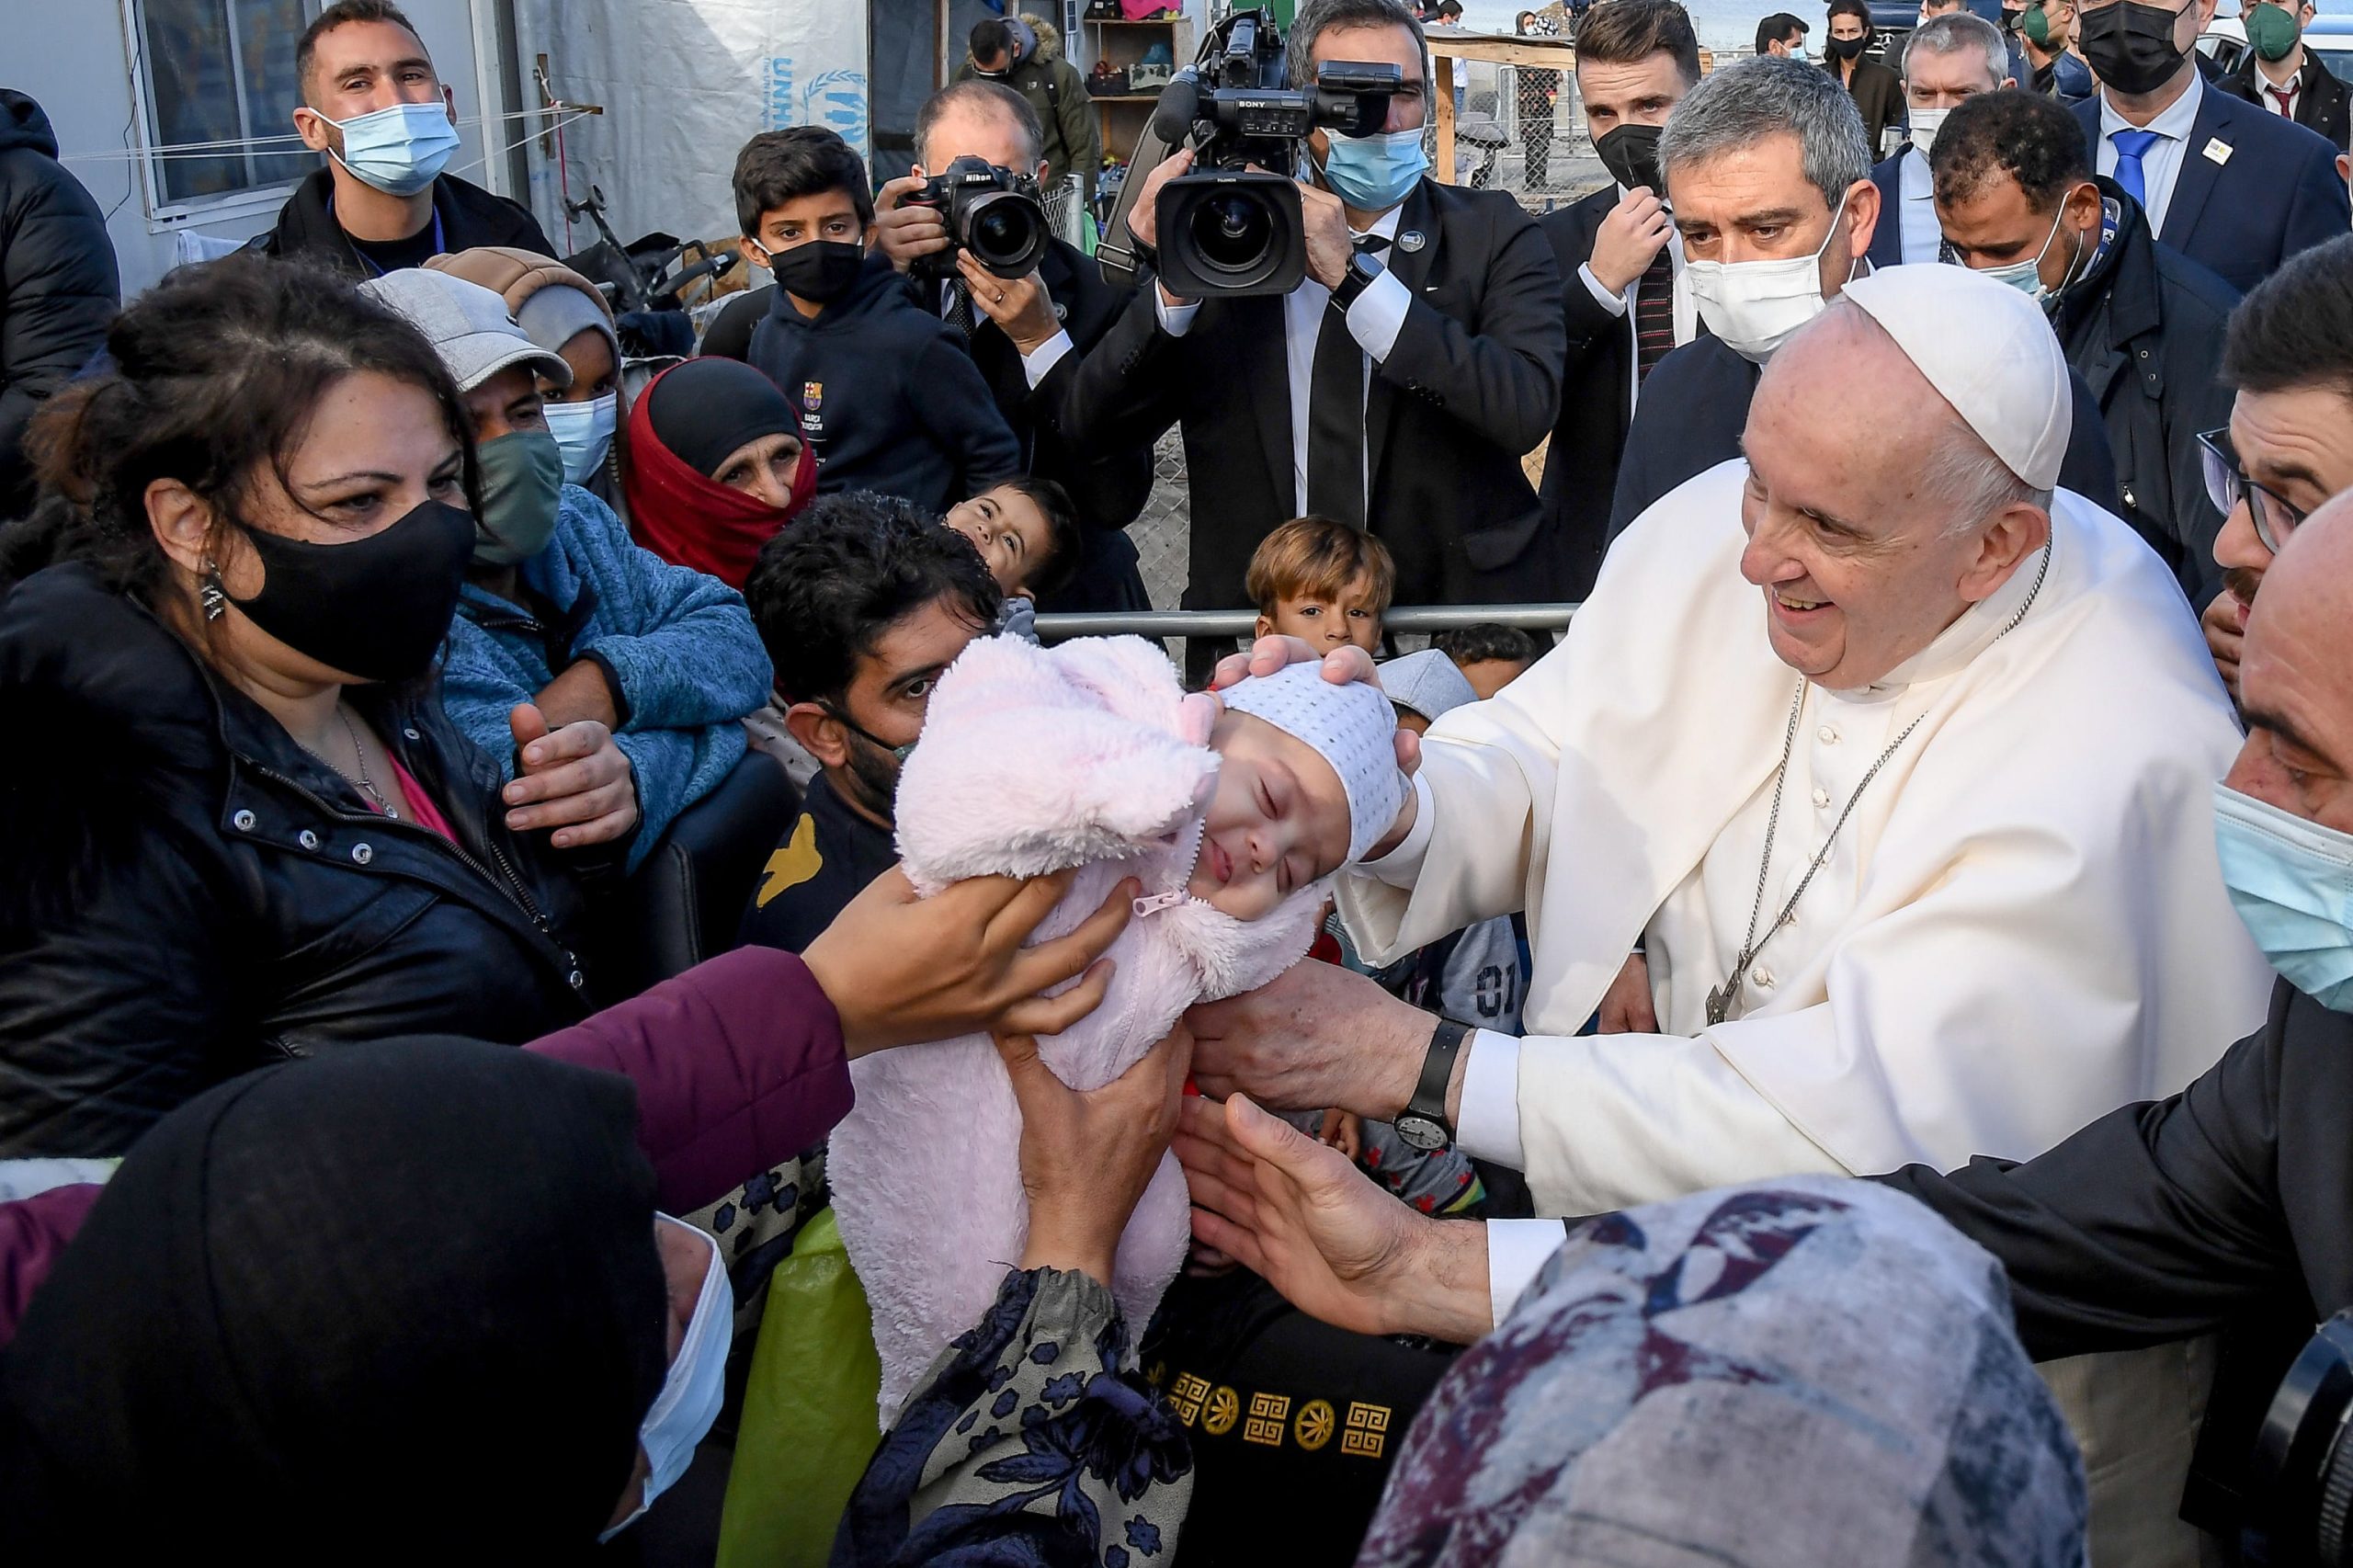 epa09623089 Pope Francis blesses a baby child at the Reception and Identification Centre (RIC) in Mytilene on the island of Lesbos, Greece, 05 December 2021. Pope Francis returned to the island of Lesbos, the migration flashpoint he first visited in 2016, to plead for better treatment of refugees as attitudes towards migrants harden across Europe.  EPA/ALESSANDRO DI MEO